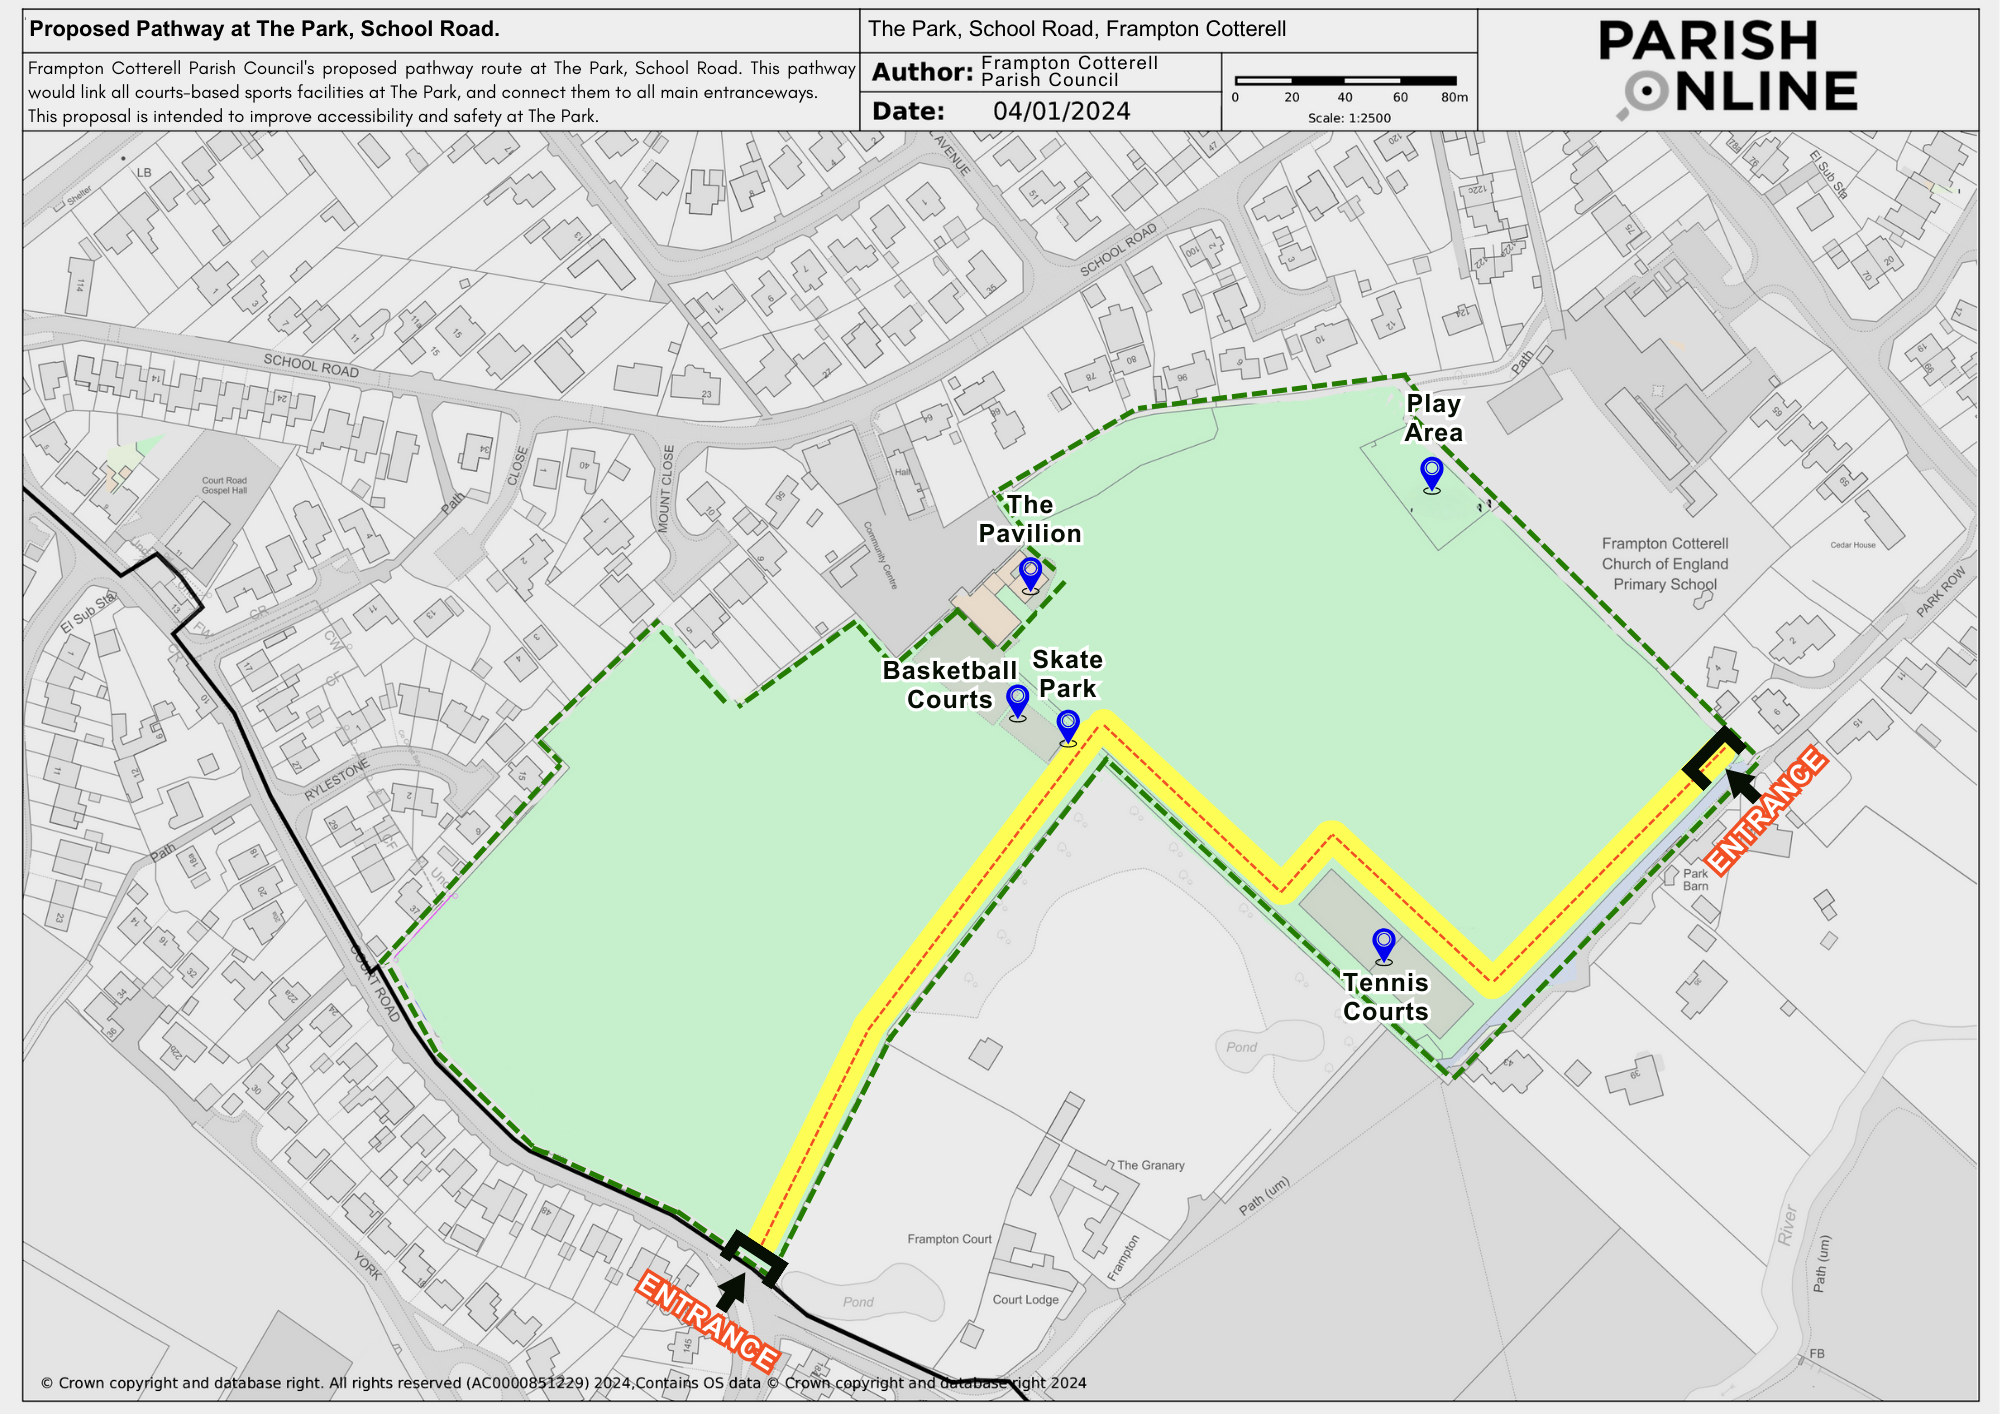 An OS map of The Park, School Road, with a yellow line marking the proposed pathway route. Text above the image reads, Frampton Cotterell Parish Council's proposed pathway route at The Park, School Road. This pathway would link all courts-based sports facilities at The Park, and connect them to all main entranceways. This proposal is intended to improve accessibility and safety at The Park. Author - Frampton Cotterell Parish Council. Date: 04/01/2024. Scale: 1:2500. Parish Online logo. Crown copyright and database right. All rights reserved (AC0000851229) 2024, Contains OS data. 